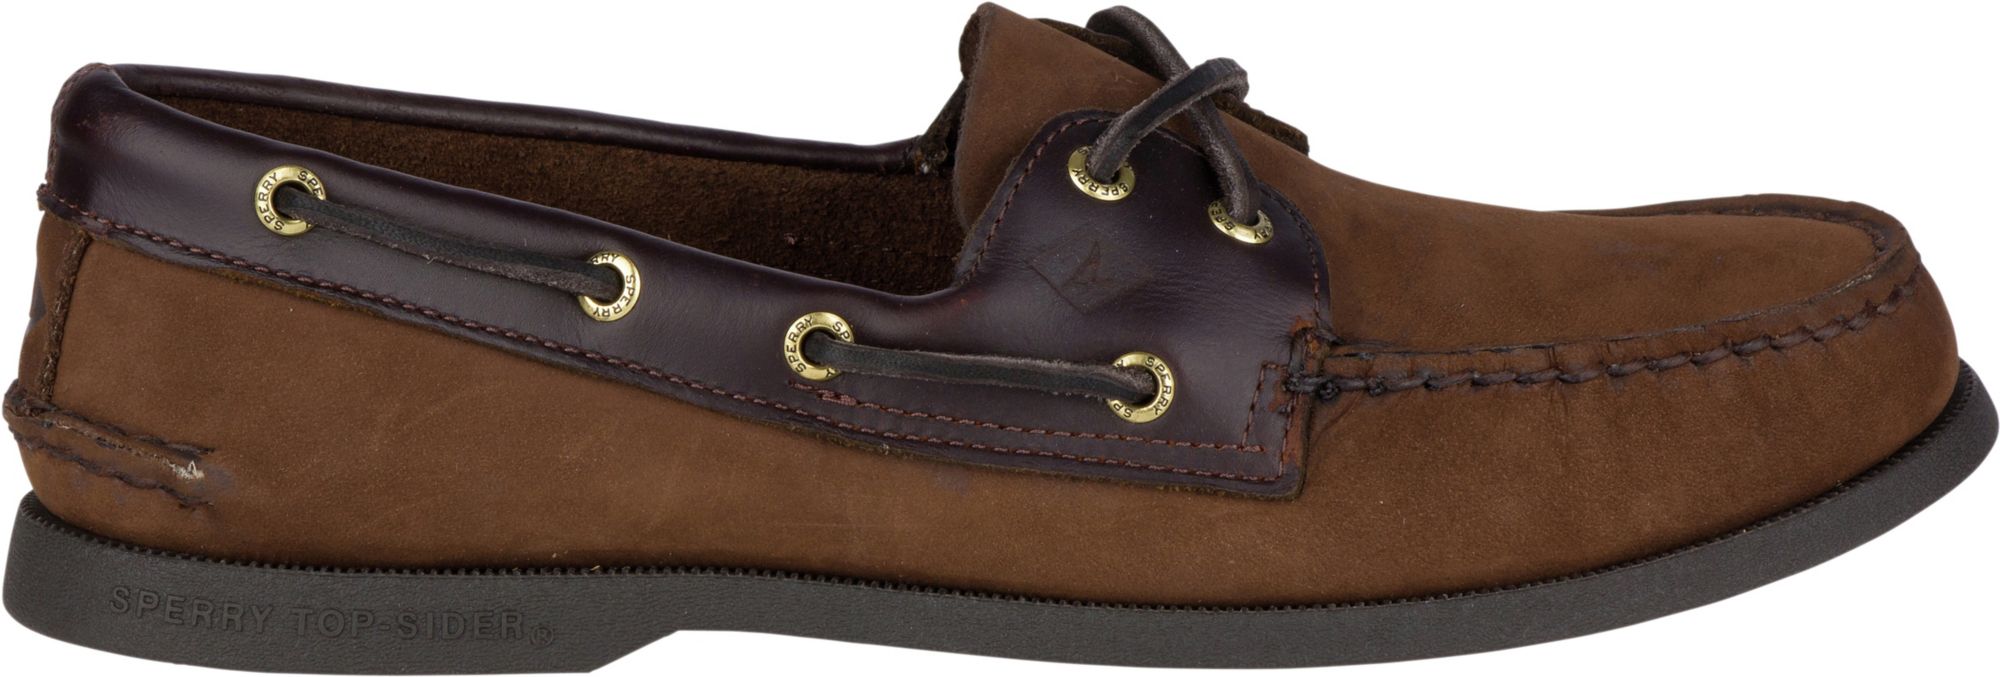 sperry authentic original leather boat shoes